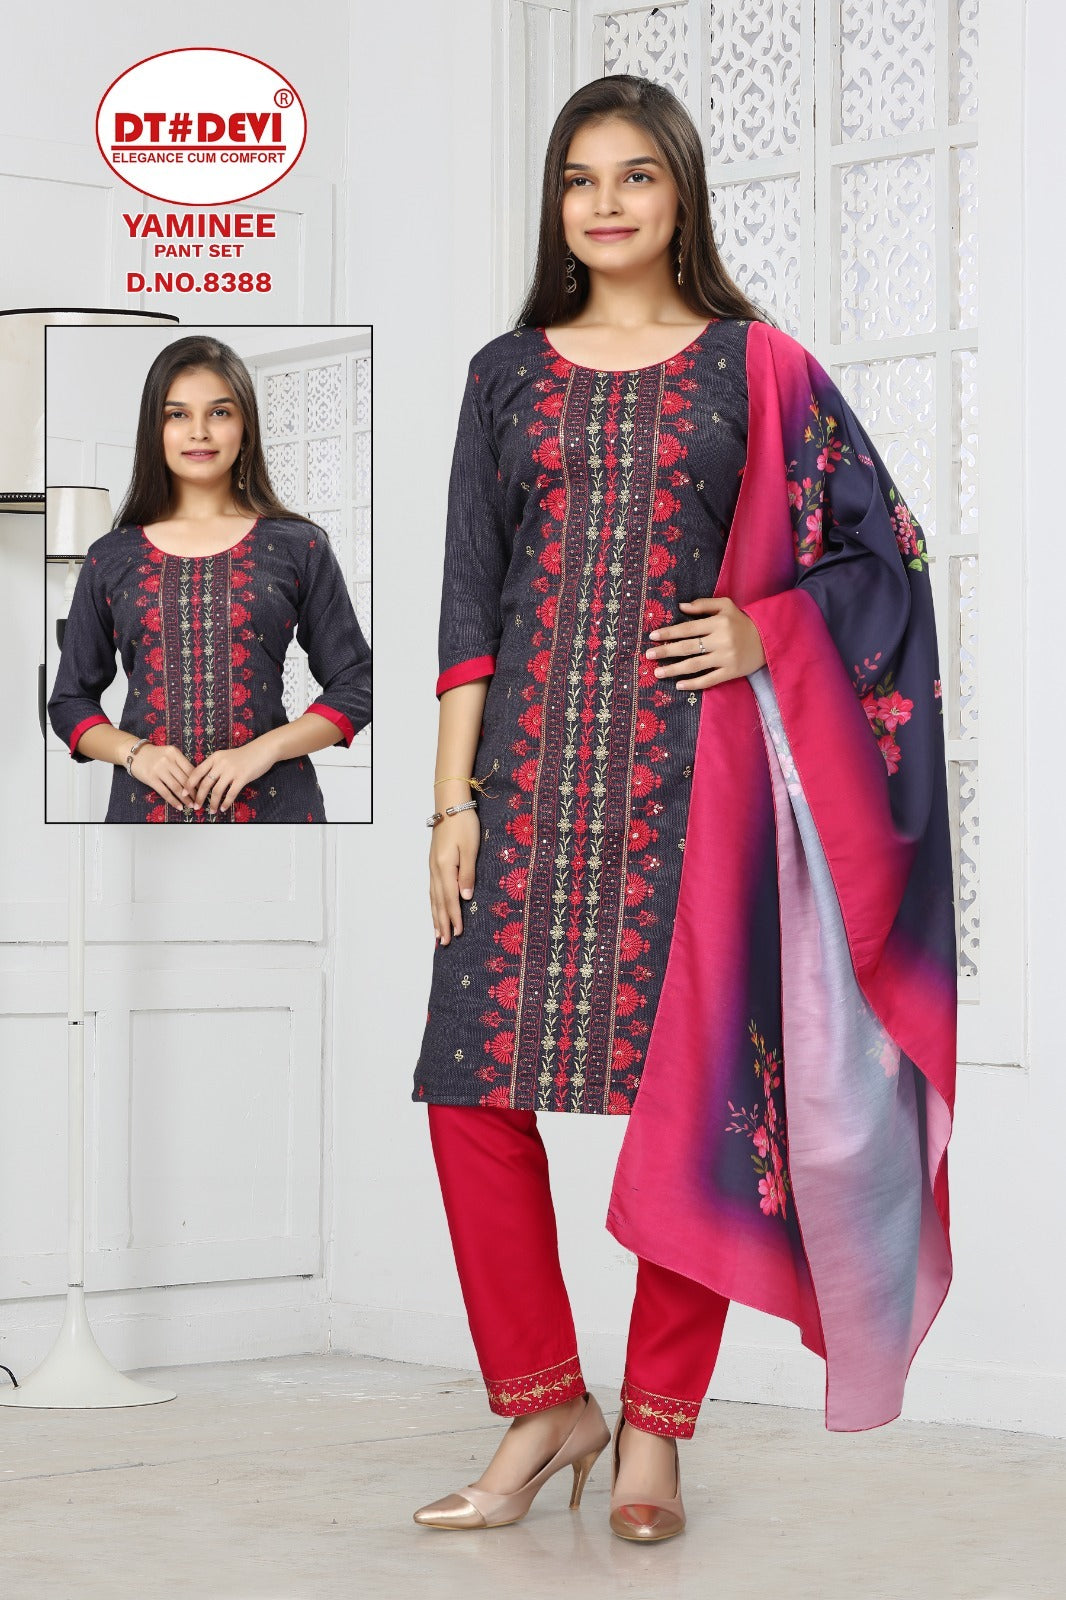 Yaminee-8388 Dt Devi Cotton Girls Readymade Pant Suits